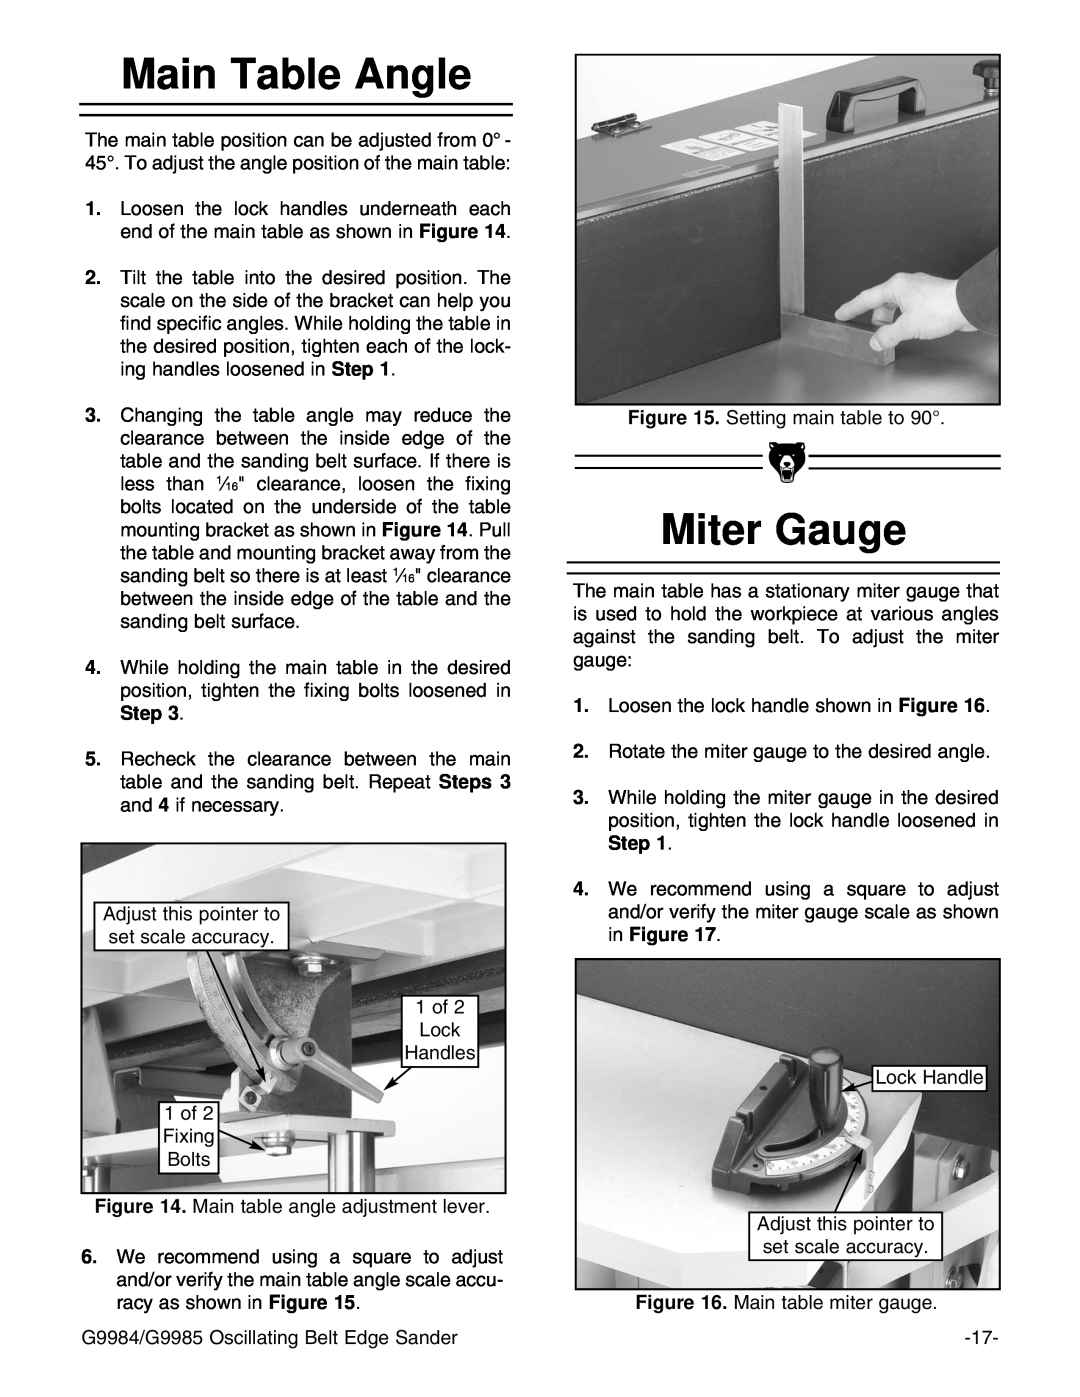 Grizzly G9985, G9984 instruction manual Main Table Angle, Miter Gauge 